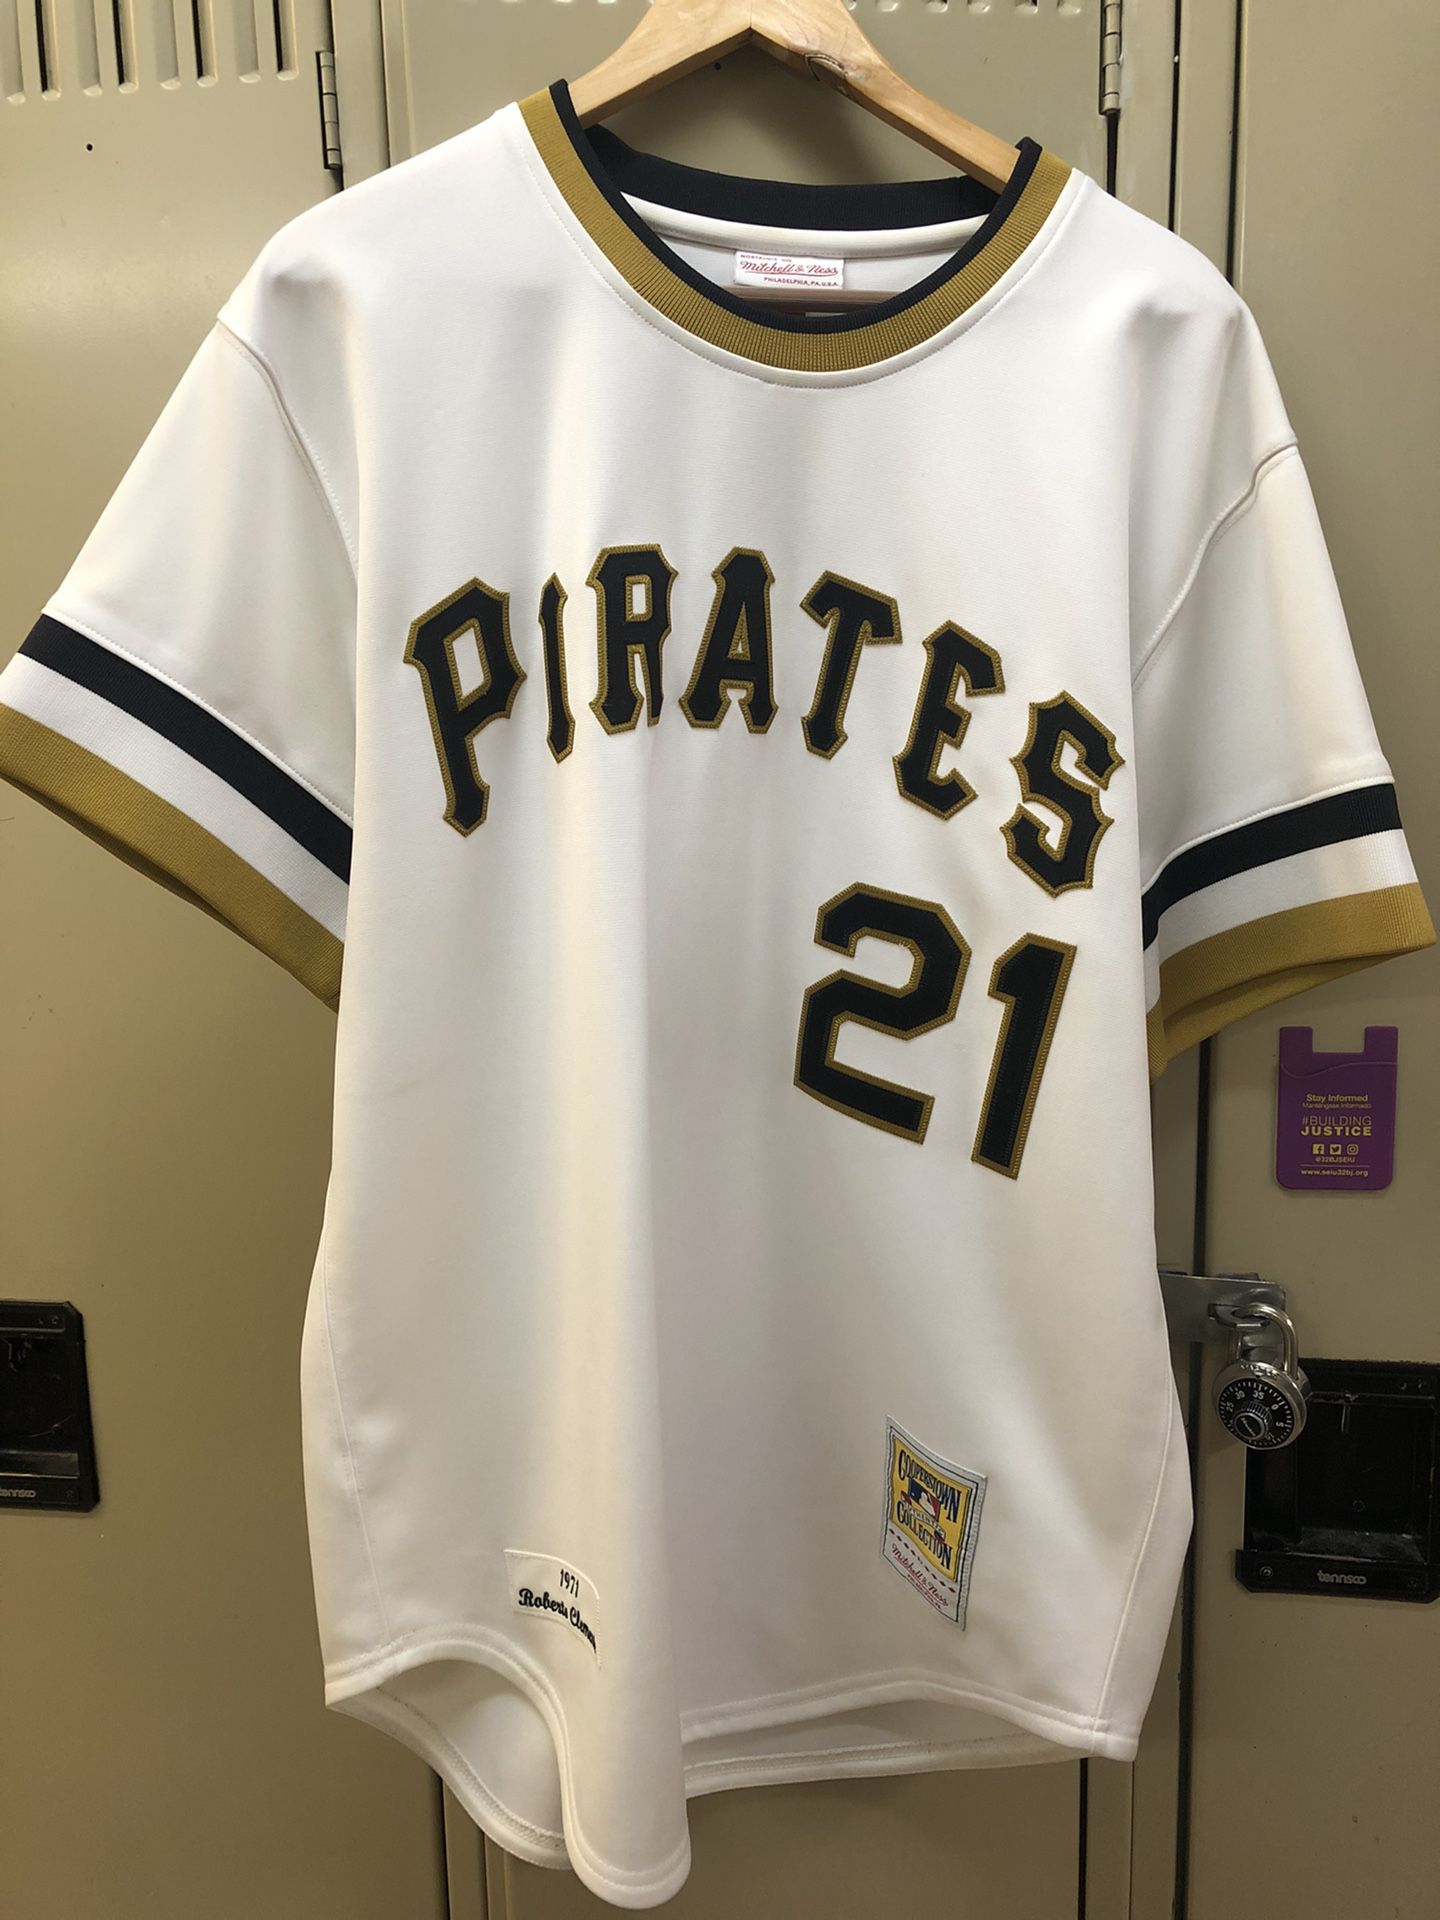 ROBERTO CLEMENTE PIRATES JERSEY SIZE 48 for Sale in Copiague, NY - OfferUp